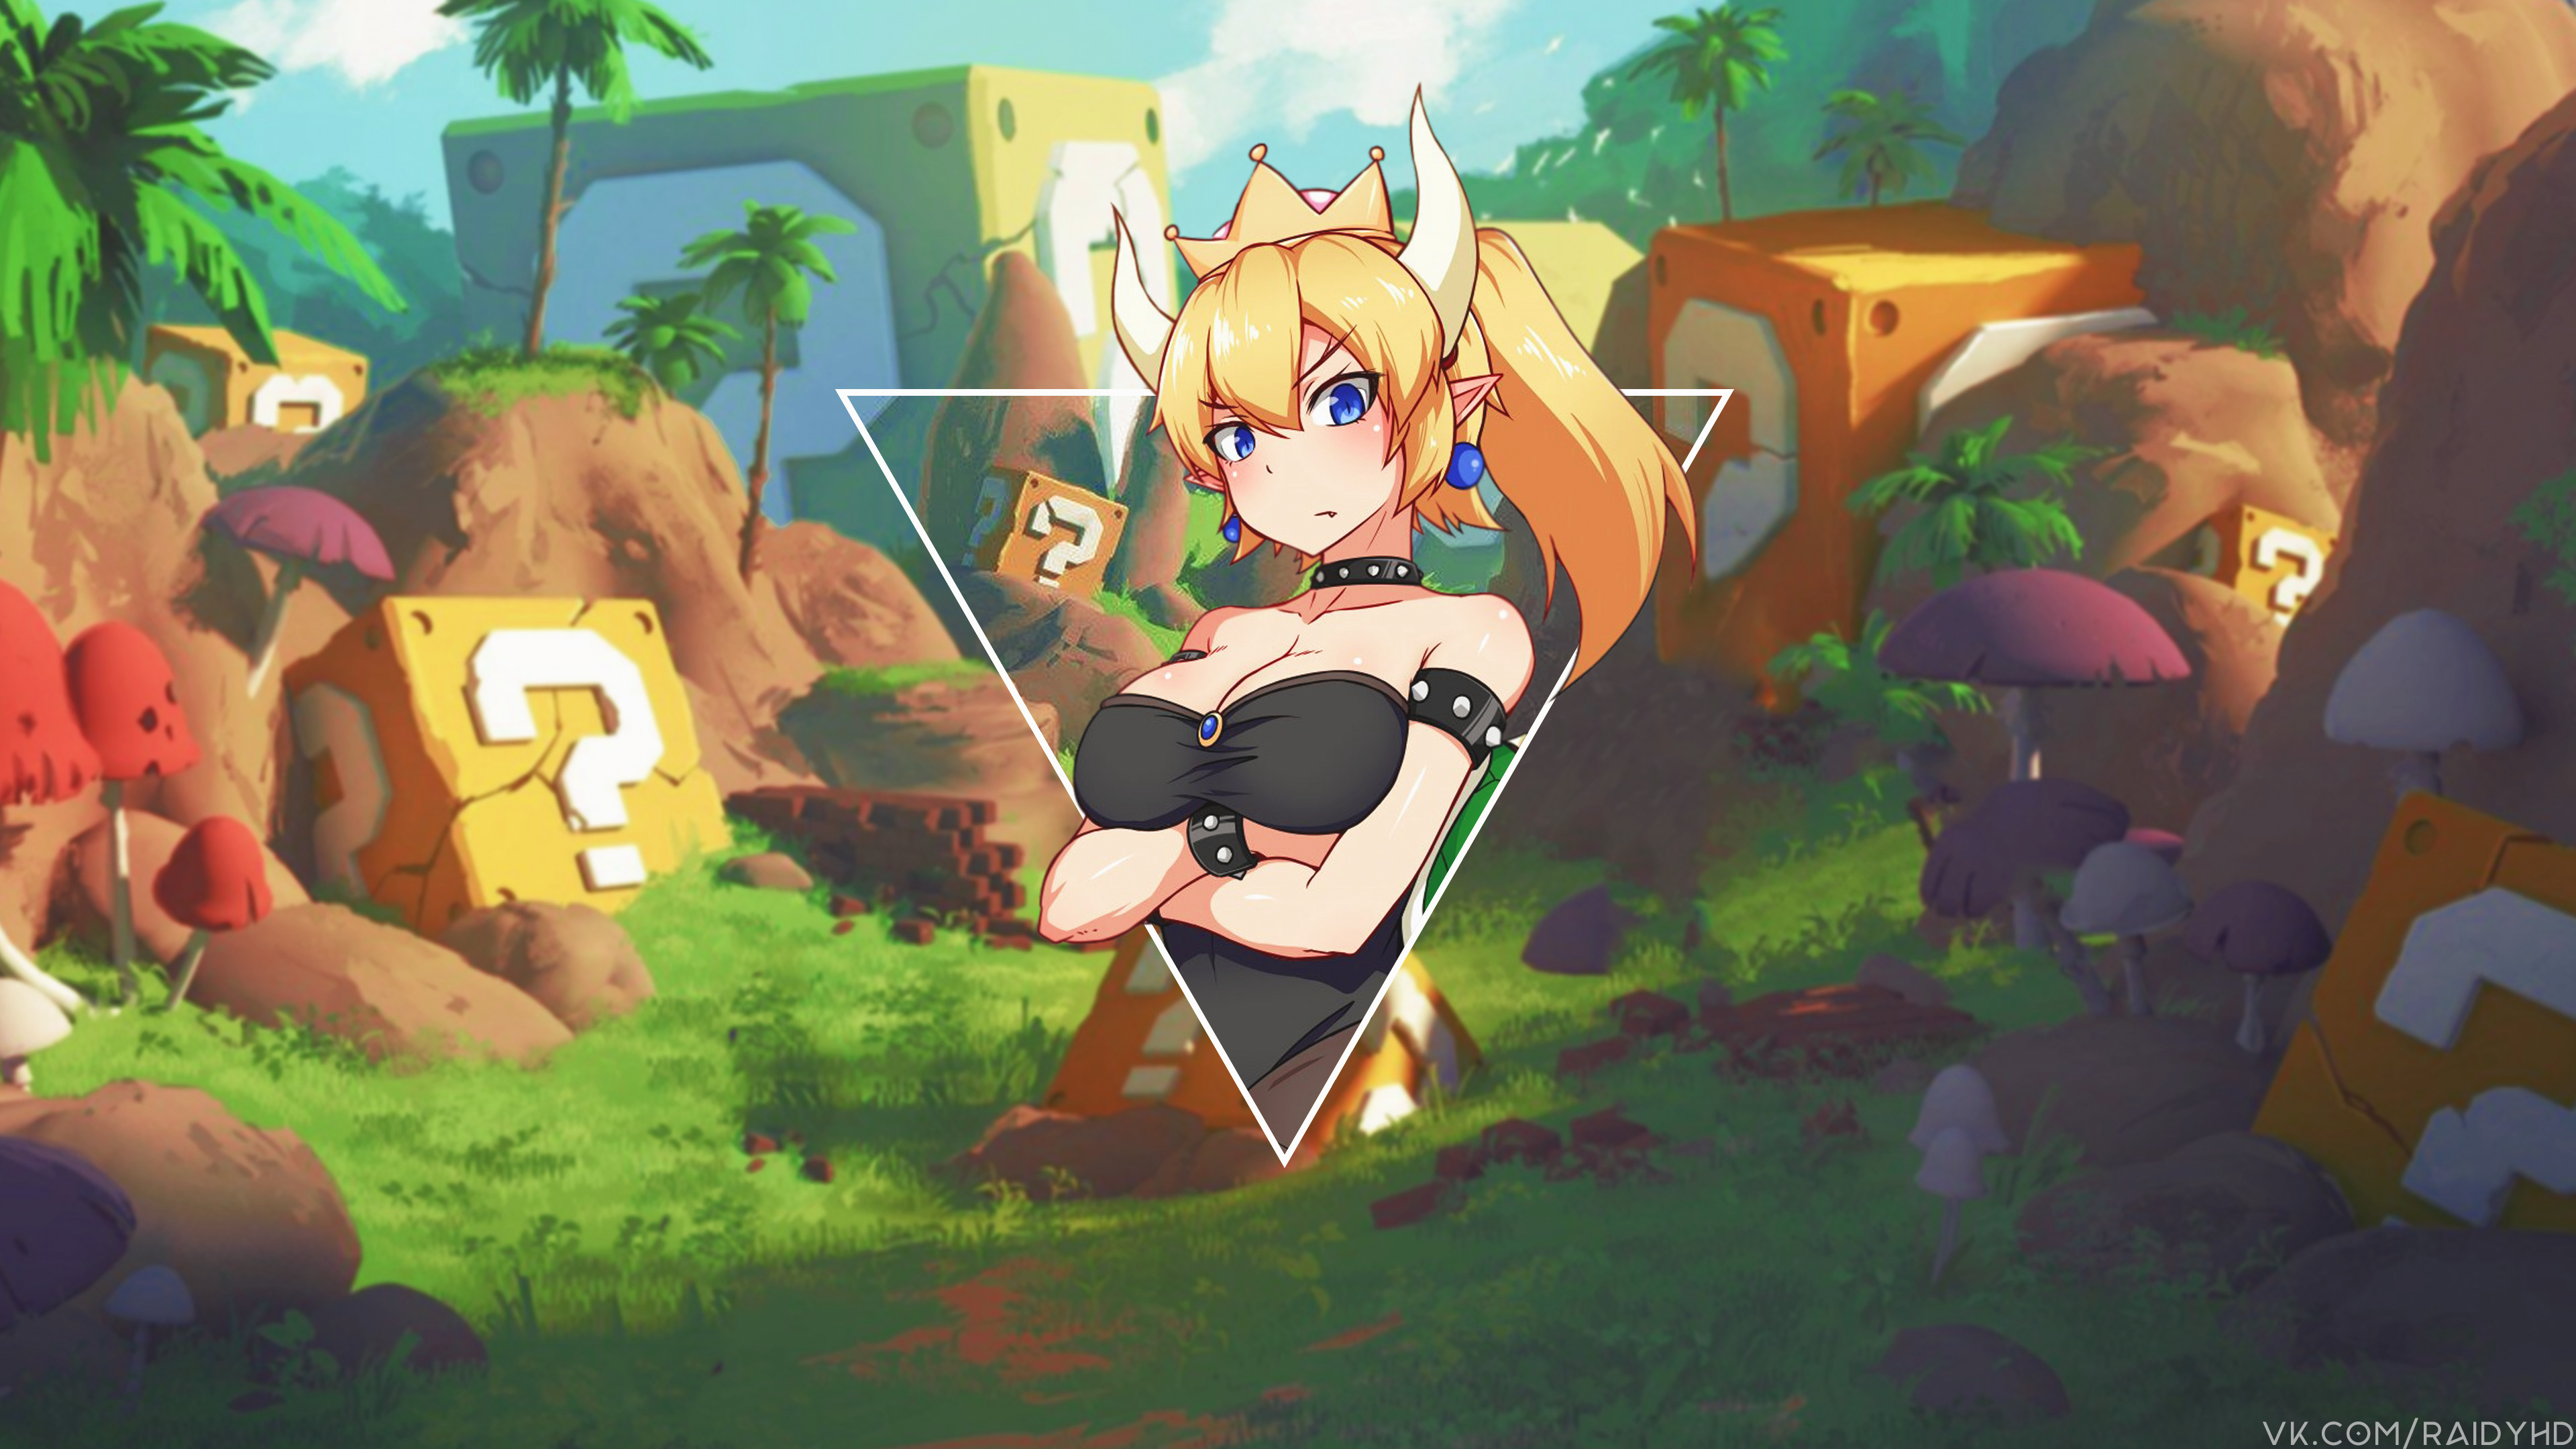 Anime 3840x2160 anime girls anime picture-in-picture Bowsette boobs